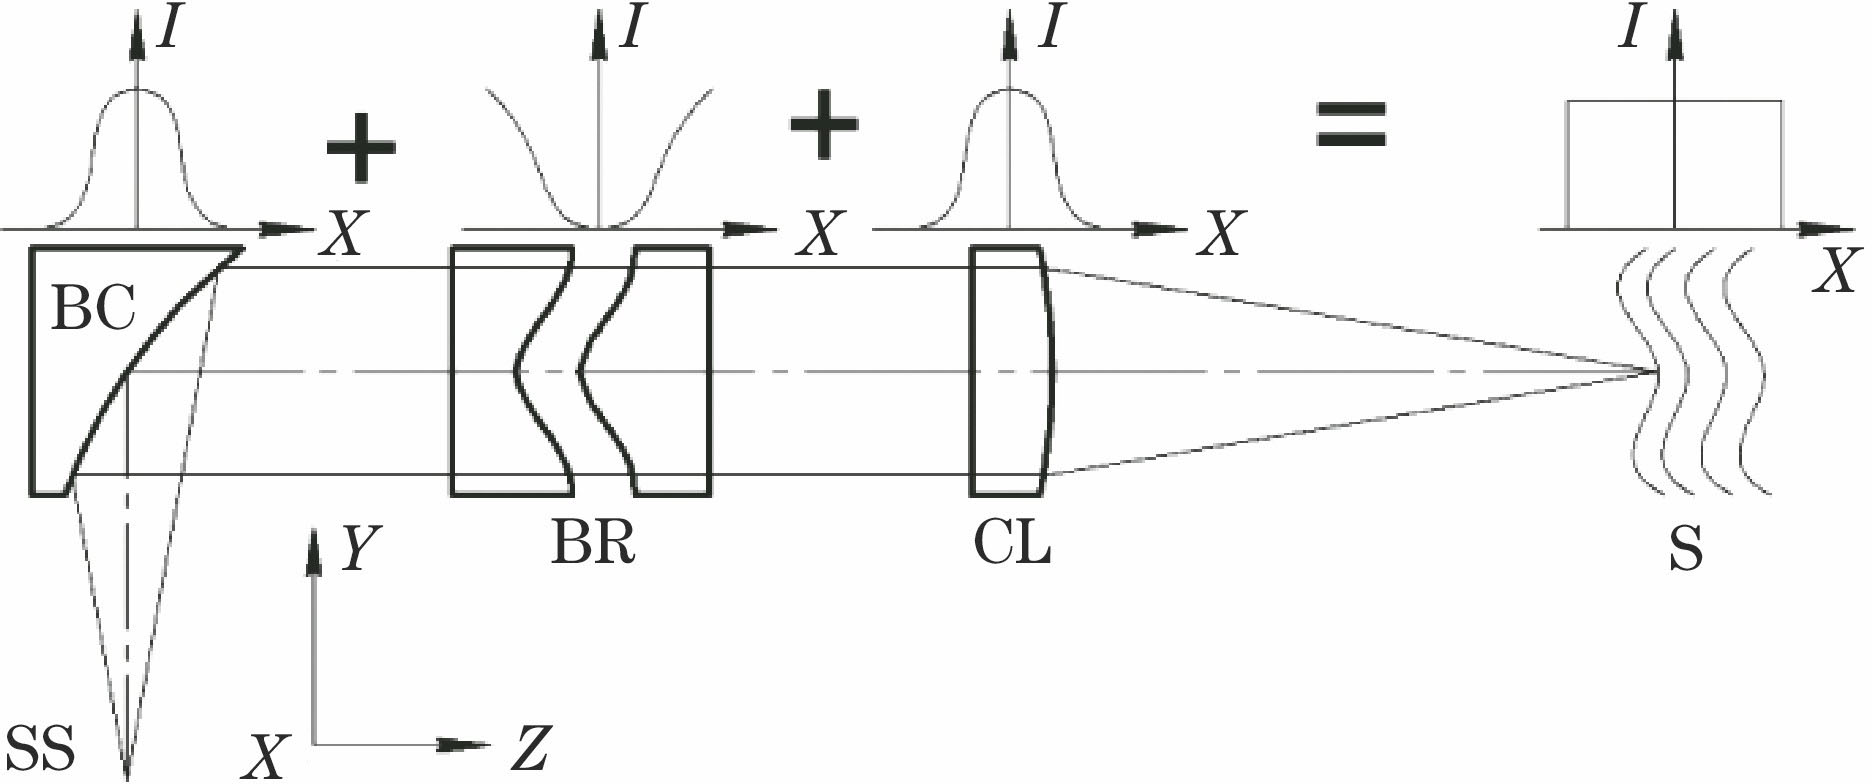 Structural diagram of illumination system (sample channel)